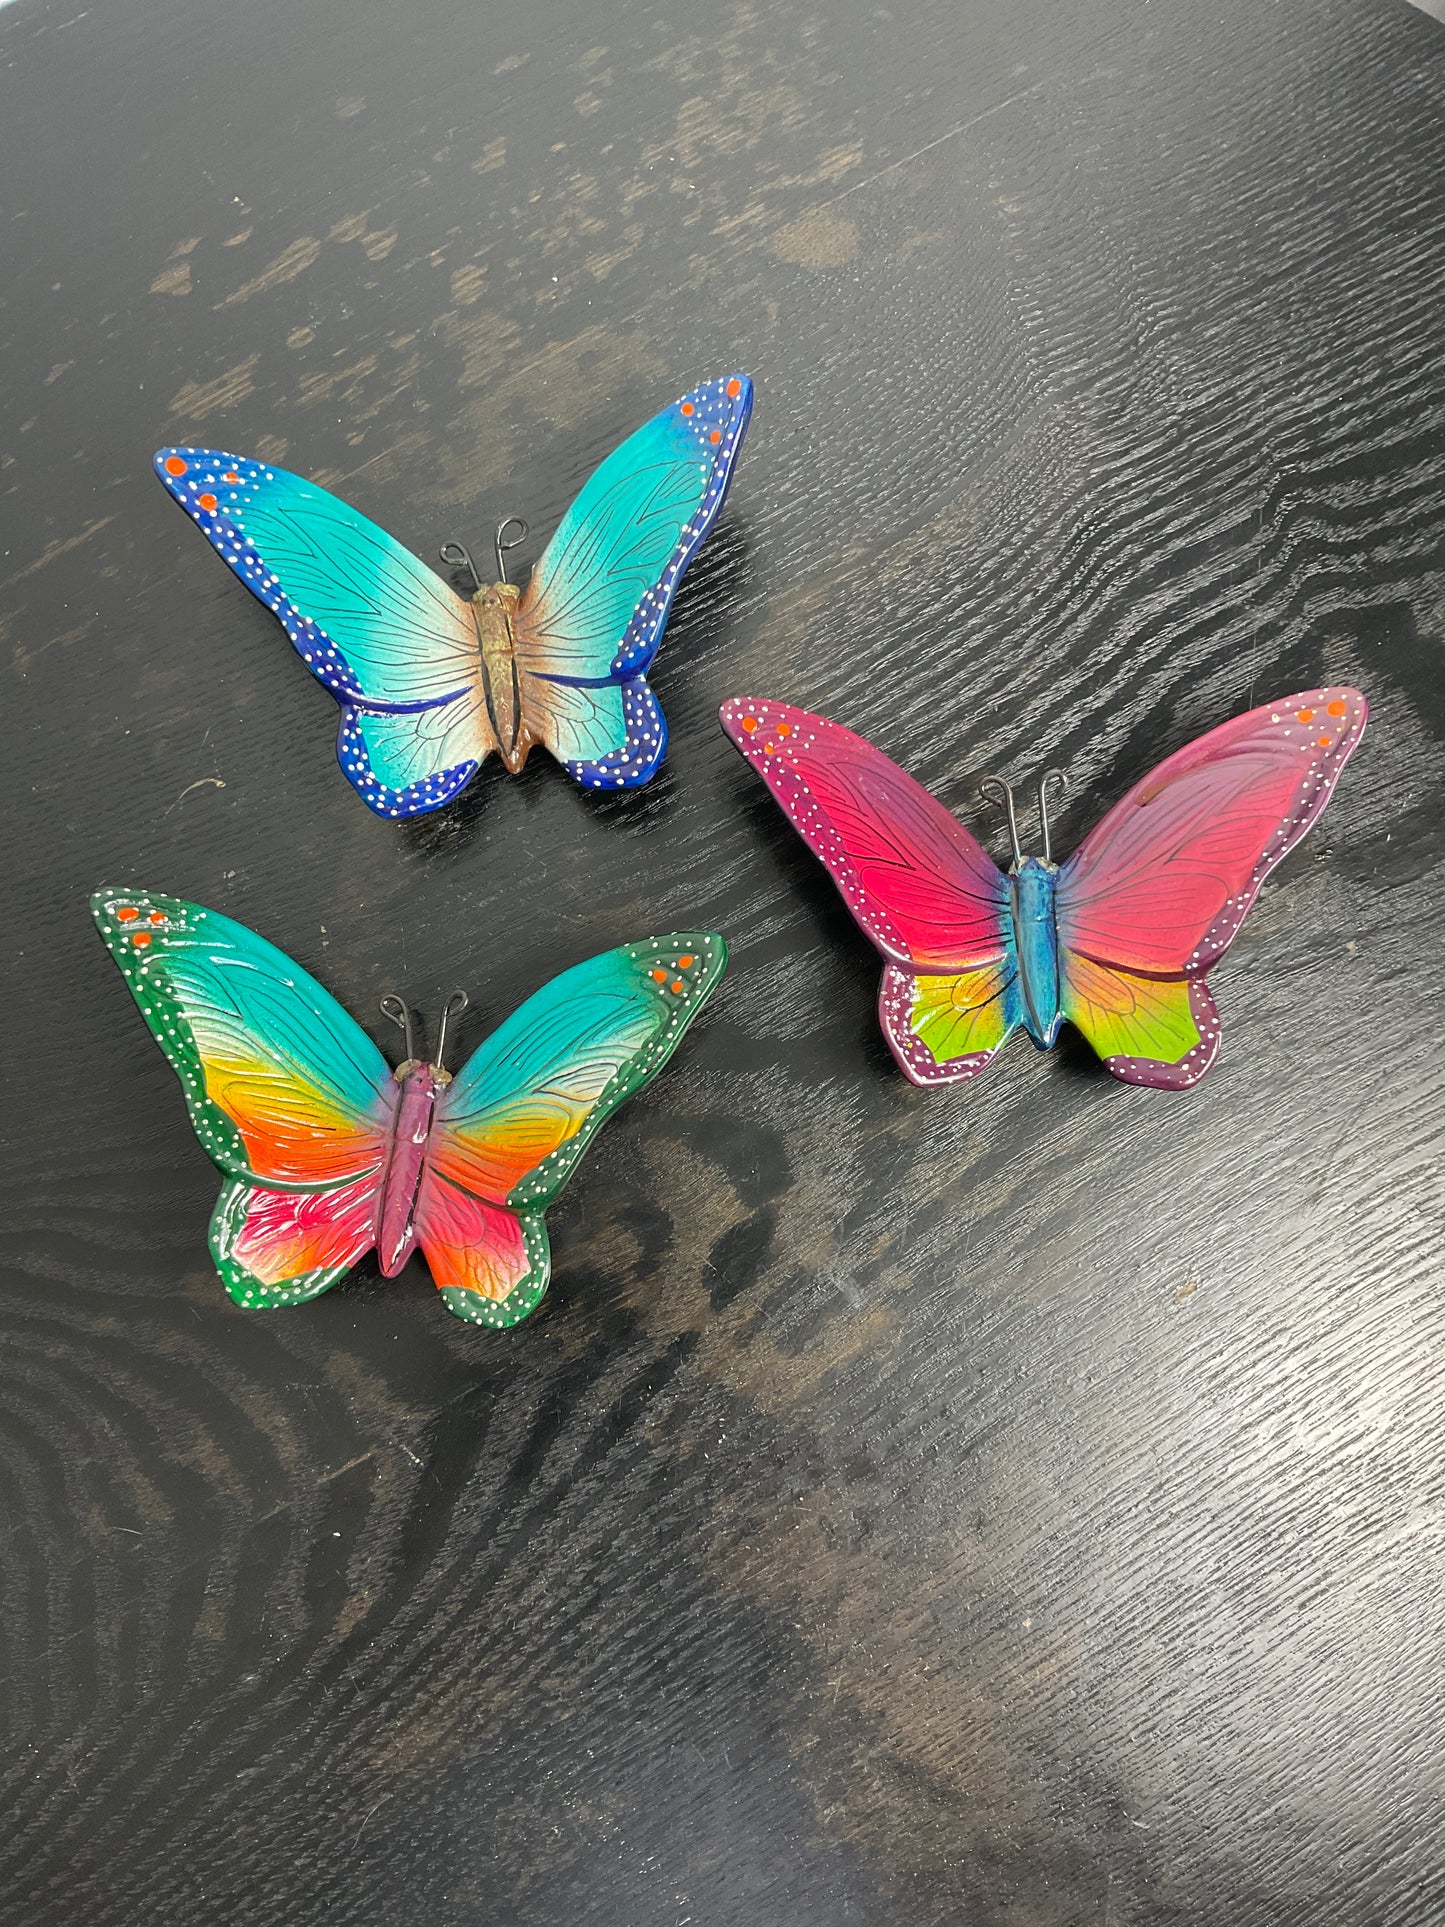 Ceramic Butterflies - Made in Mexico